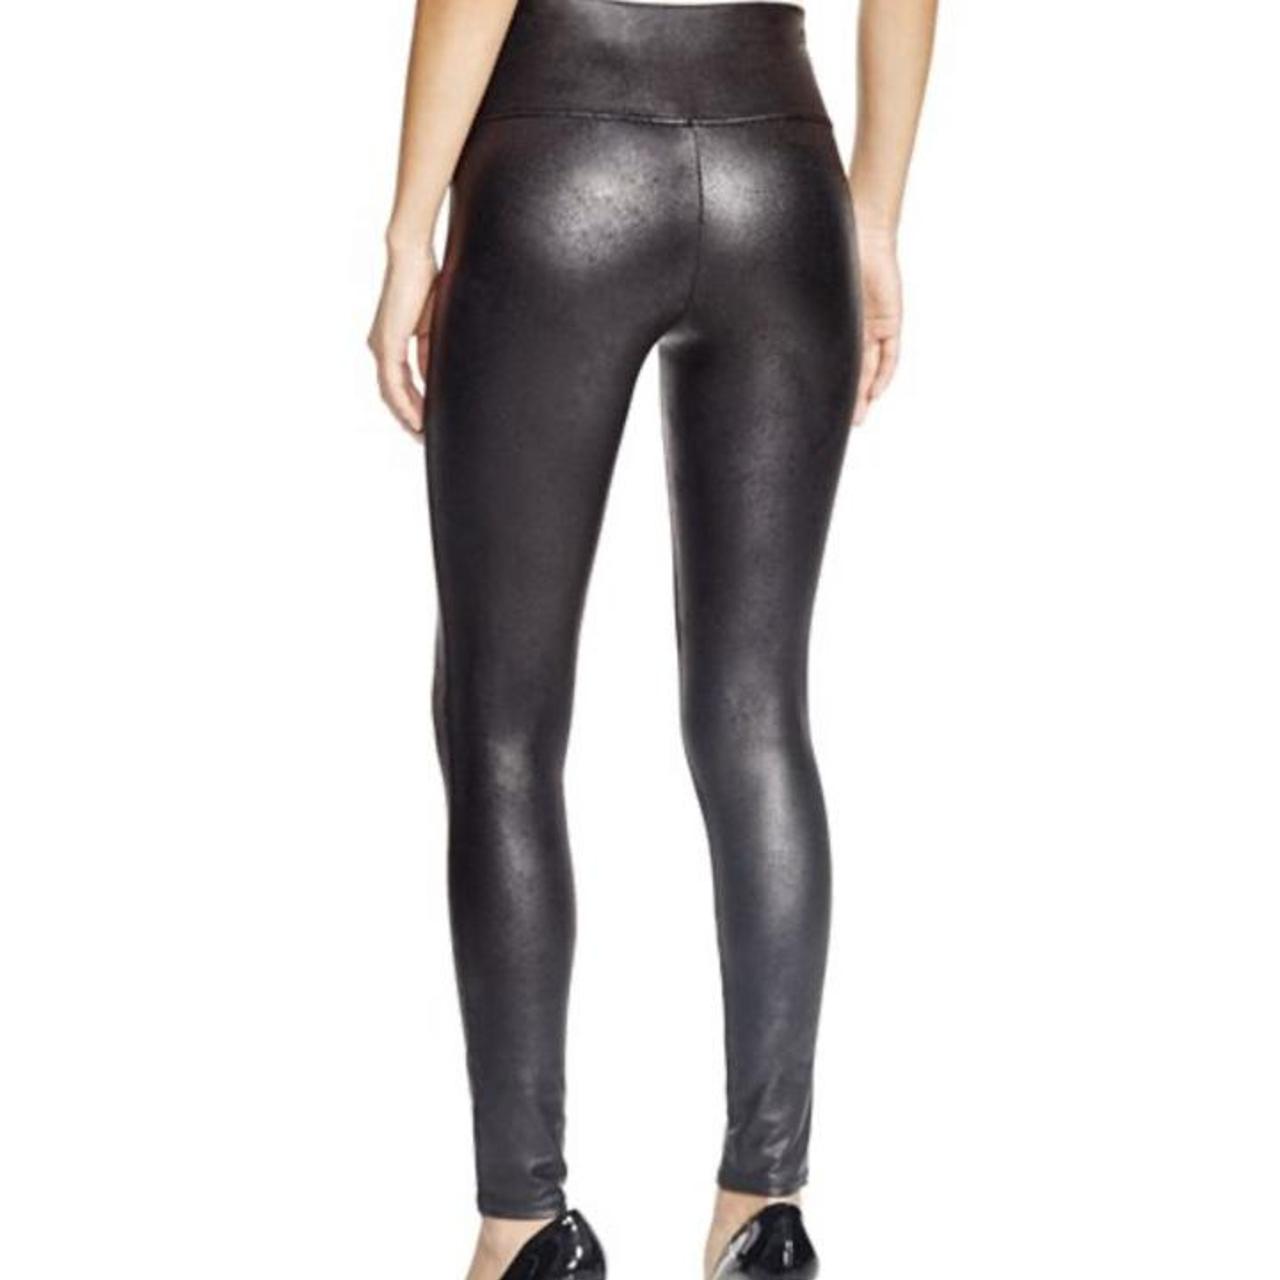 Product Image 2 - NWOT Spanx Faux-Leather Leggings

Features a